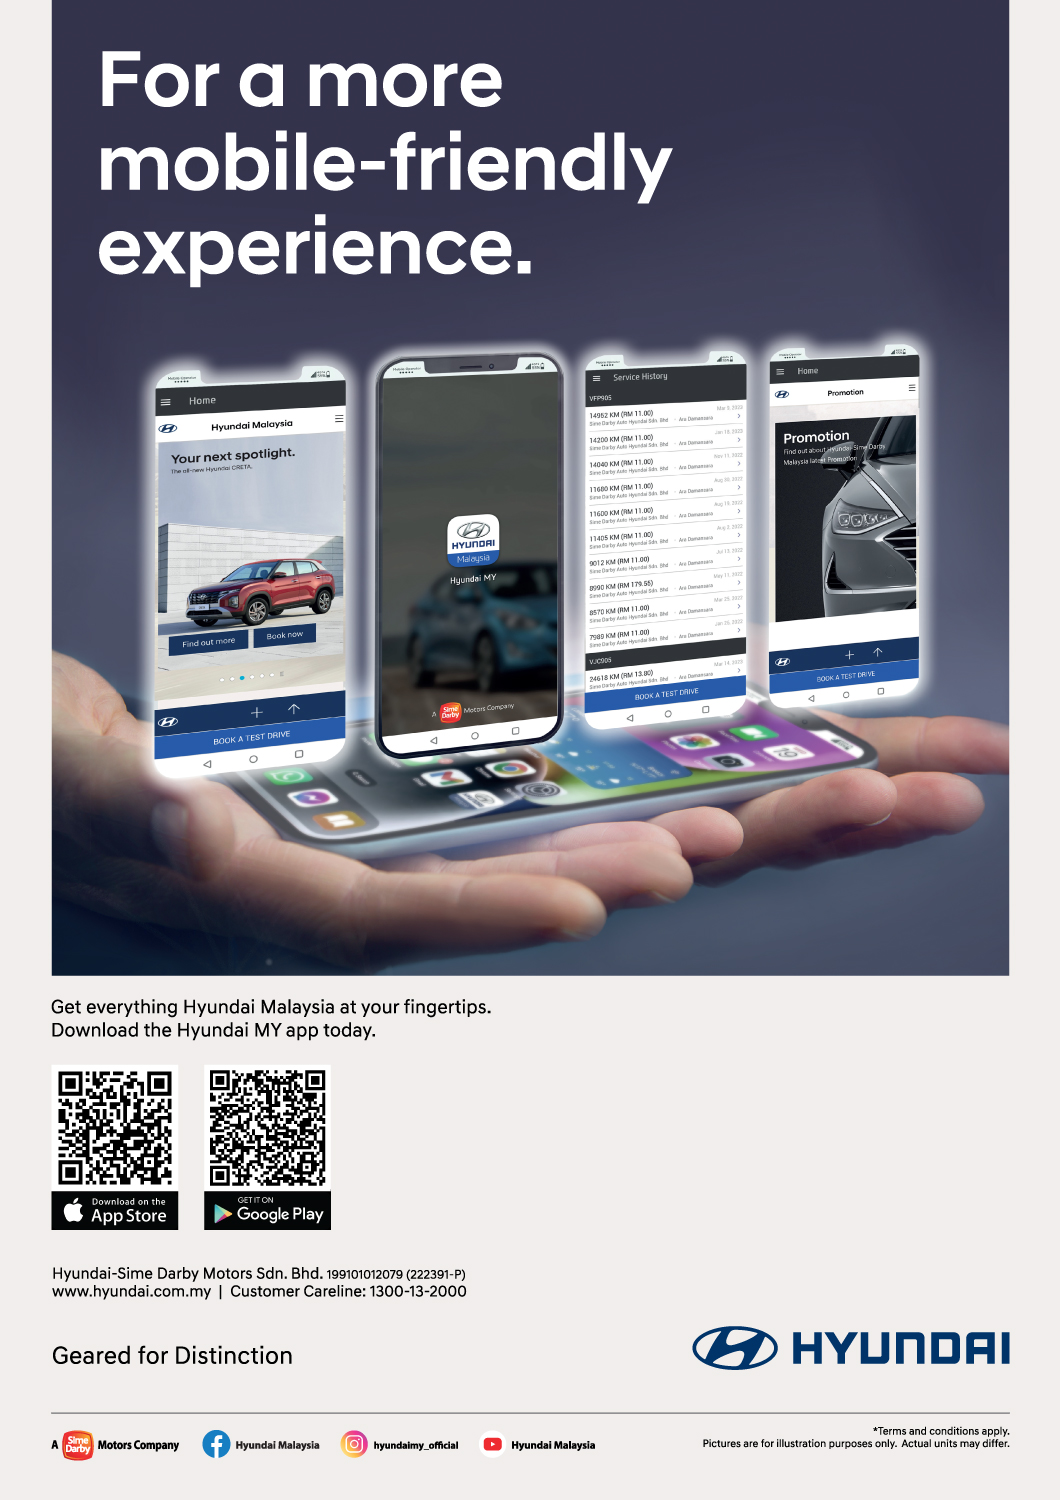 For a more mobile-friendly experience | Get everything Hyundai Malaysia at your fingertips. Download the Hyundai MY app today.